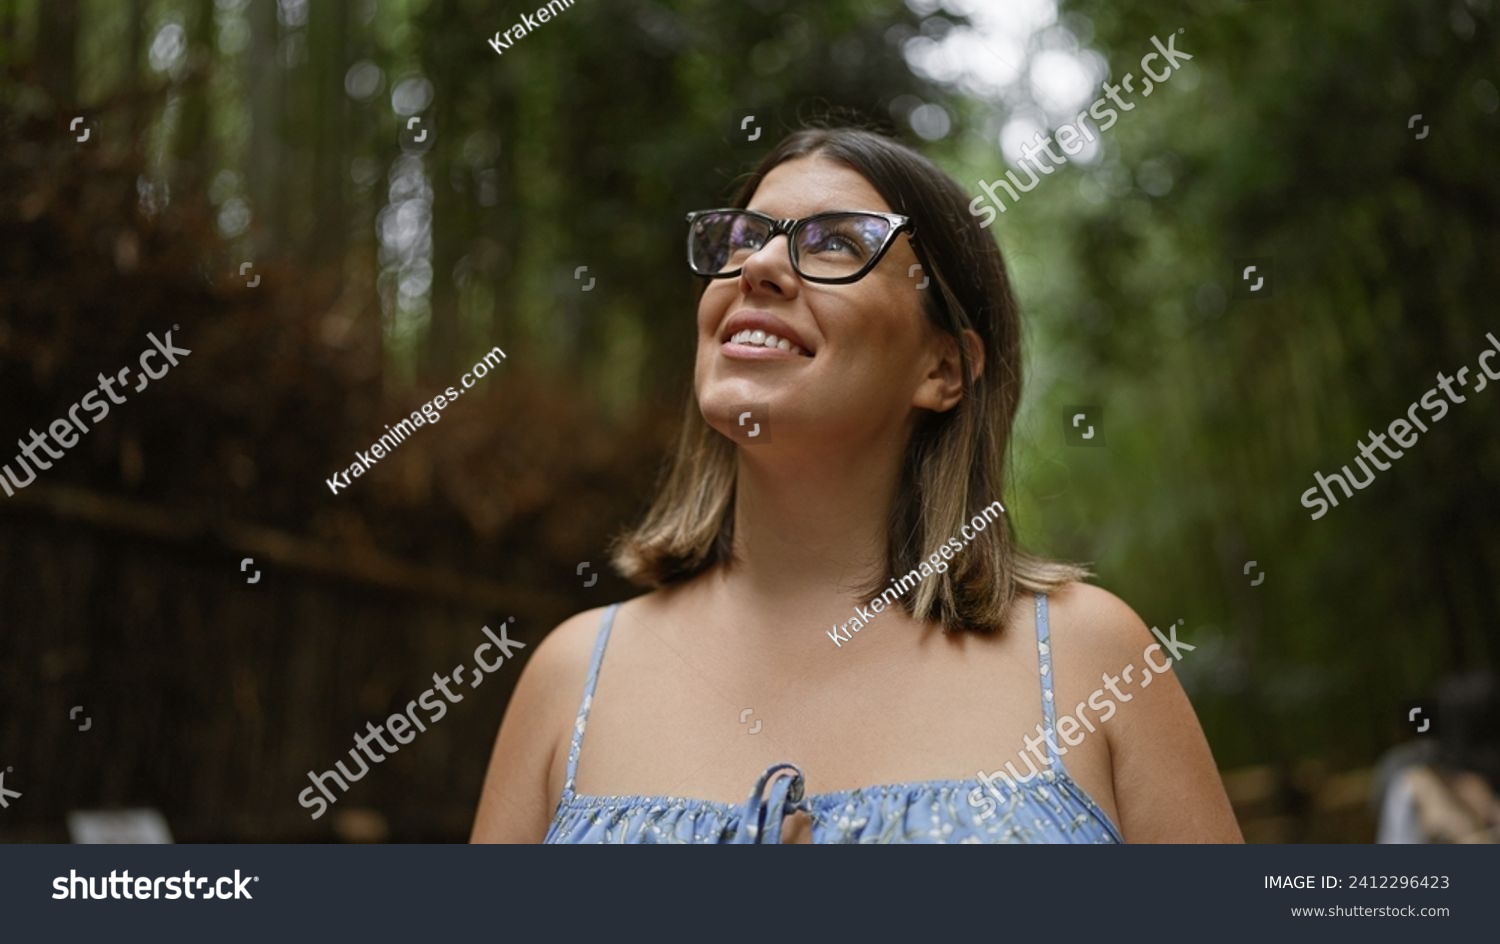 Beautiful hispanic woman with glasses, smiling confidently as she stands amongst kyoto's lush bamboo forest, looking around, full of joy and amazement. #2412296423